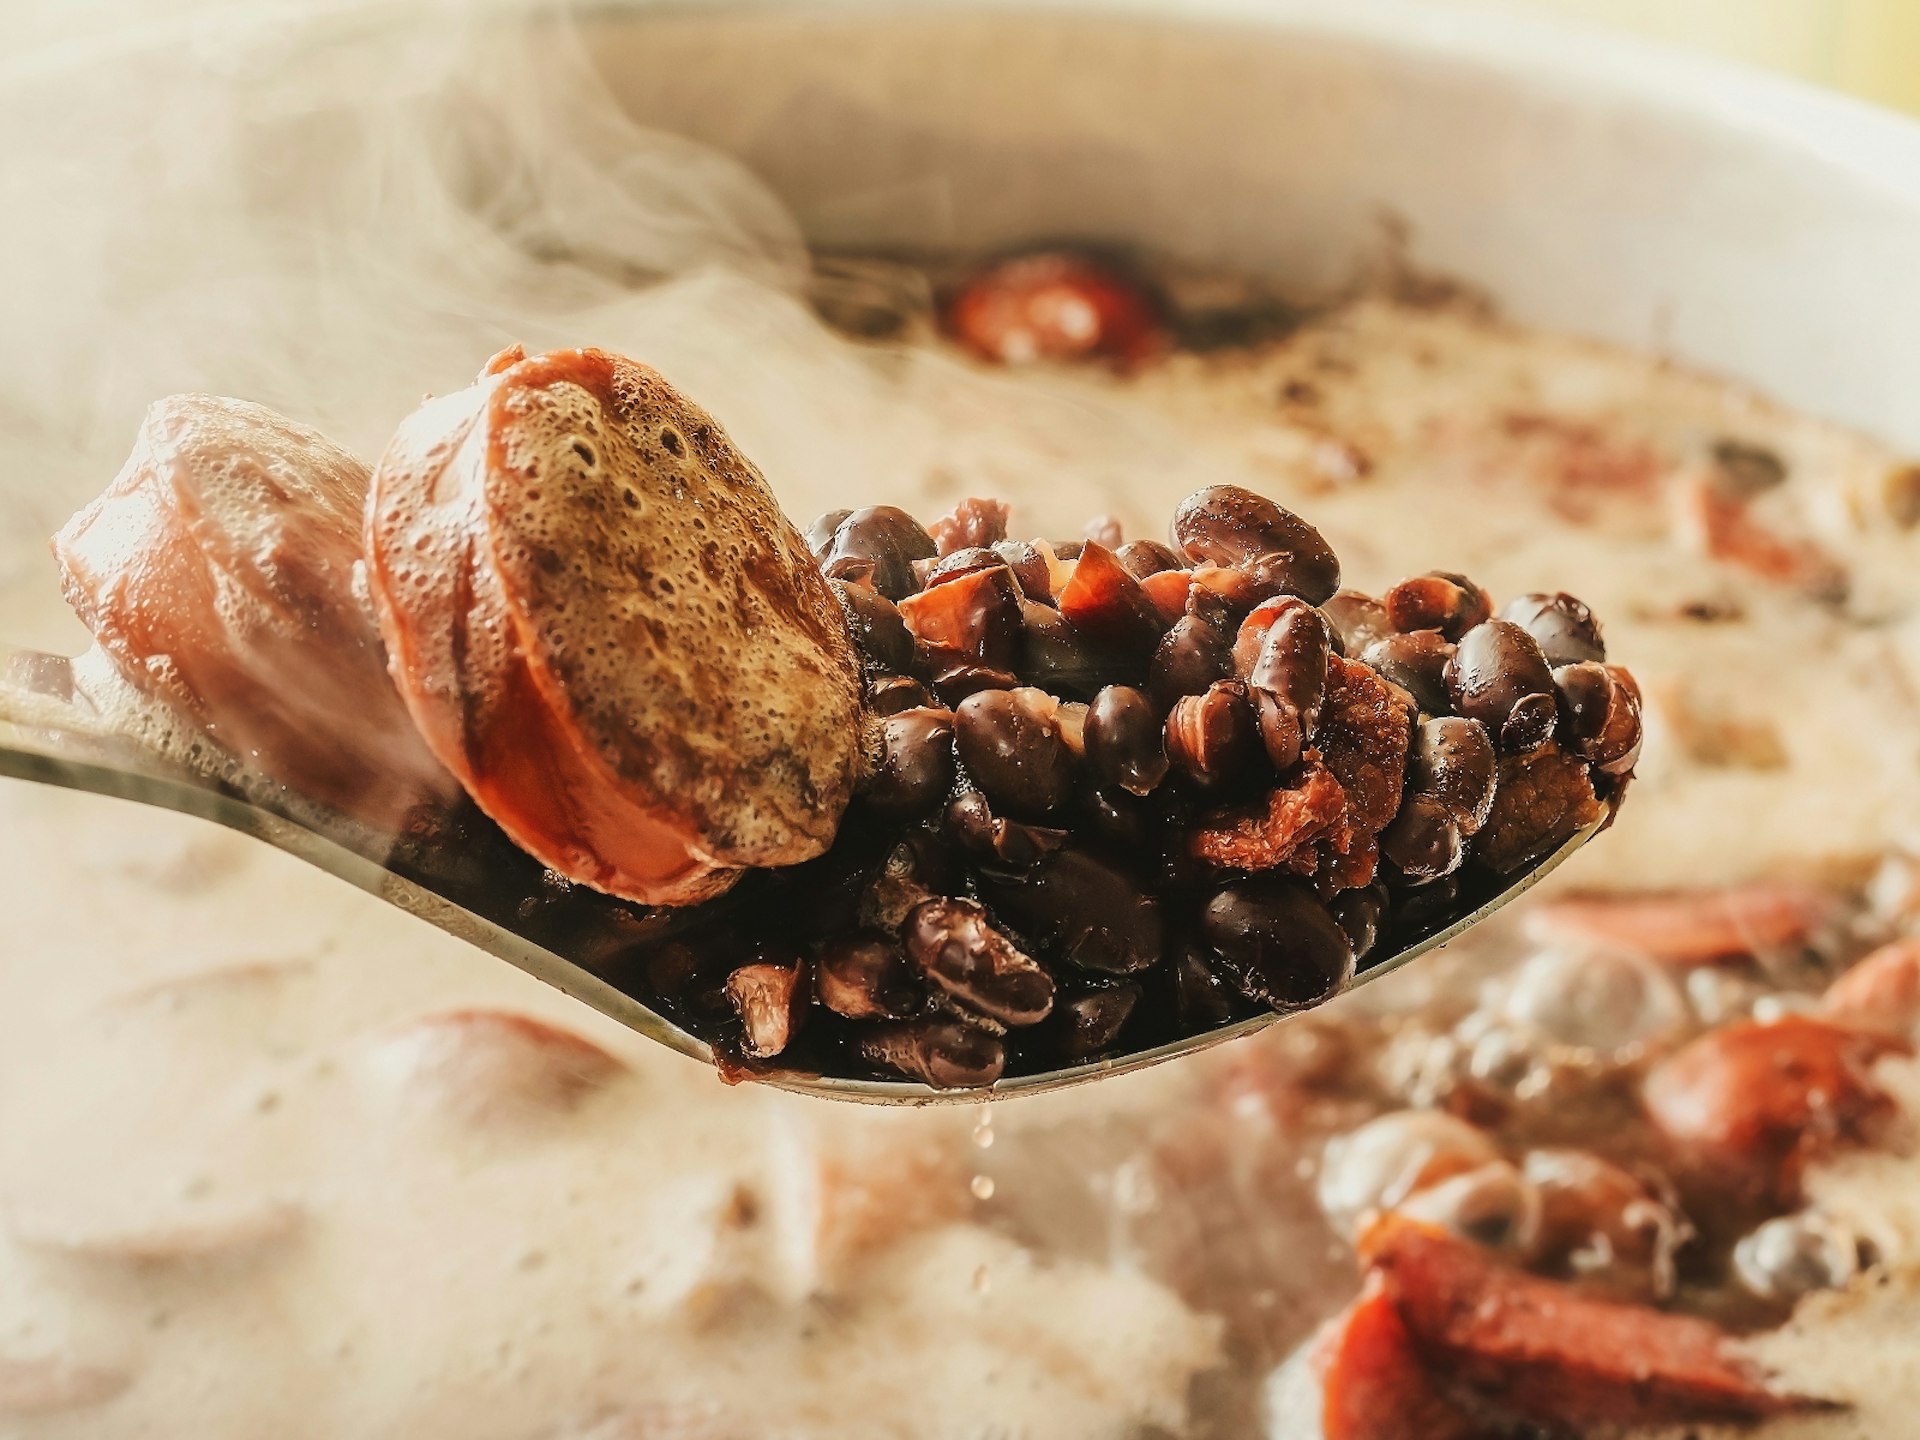 A pot of feijoada simmering on the stove © Vinicius Bacarin / Shutterstock